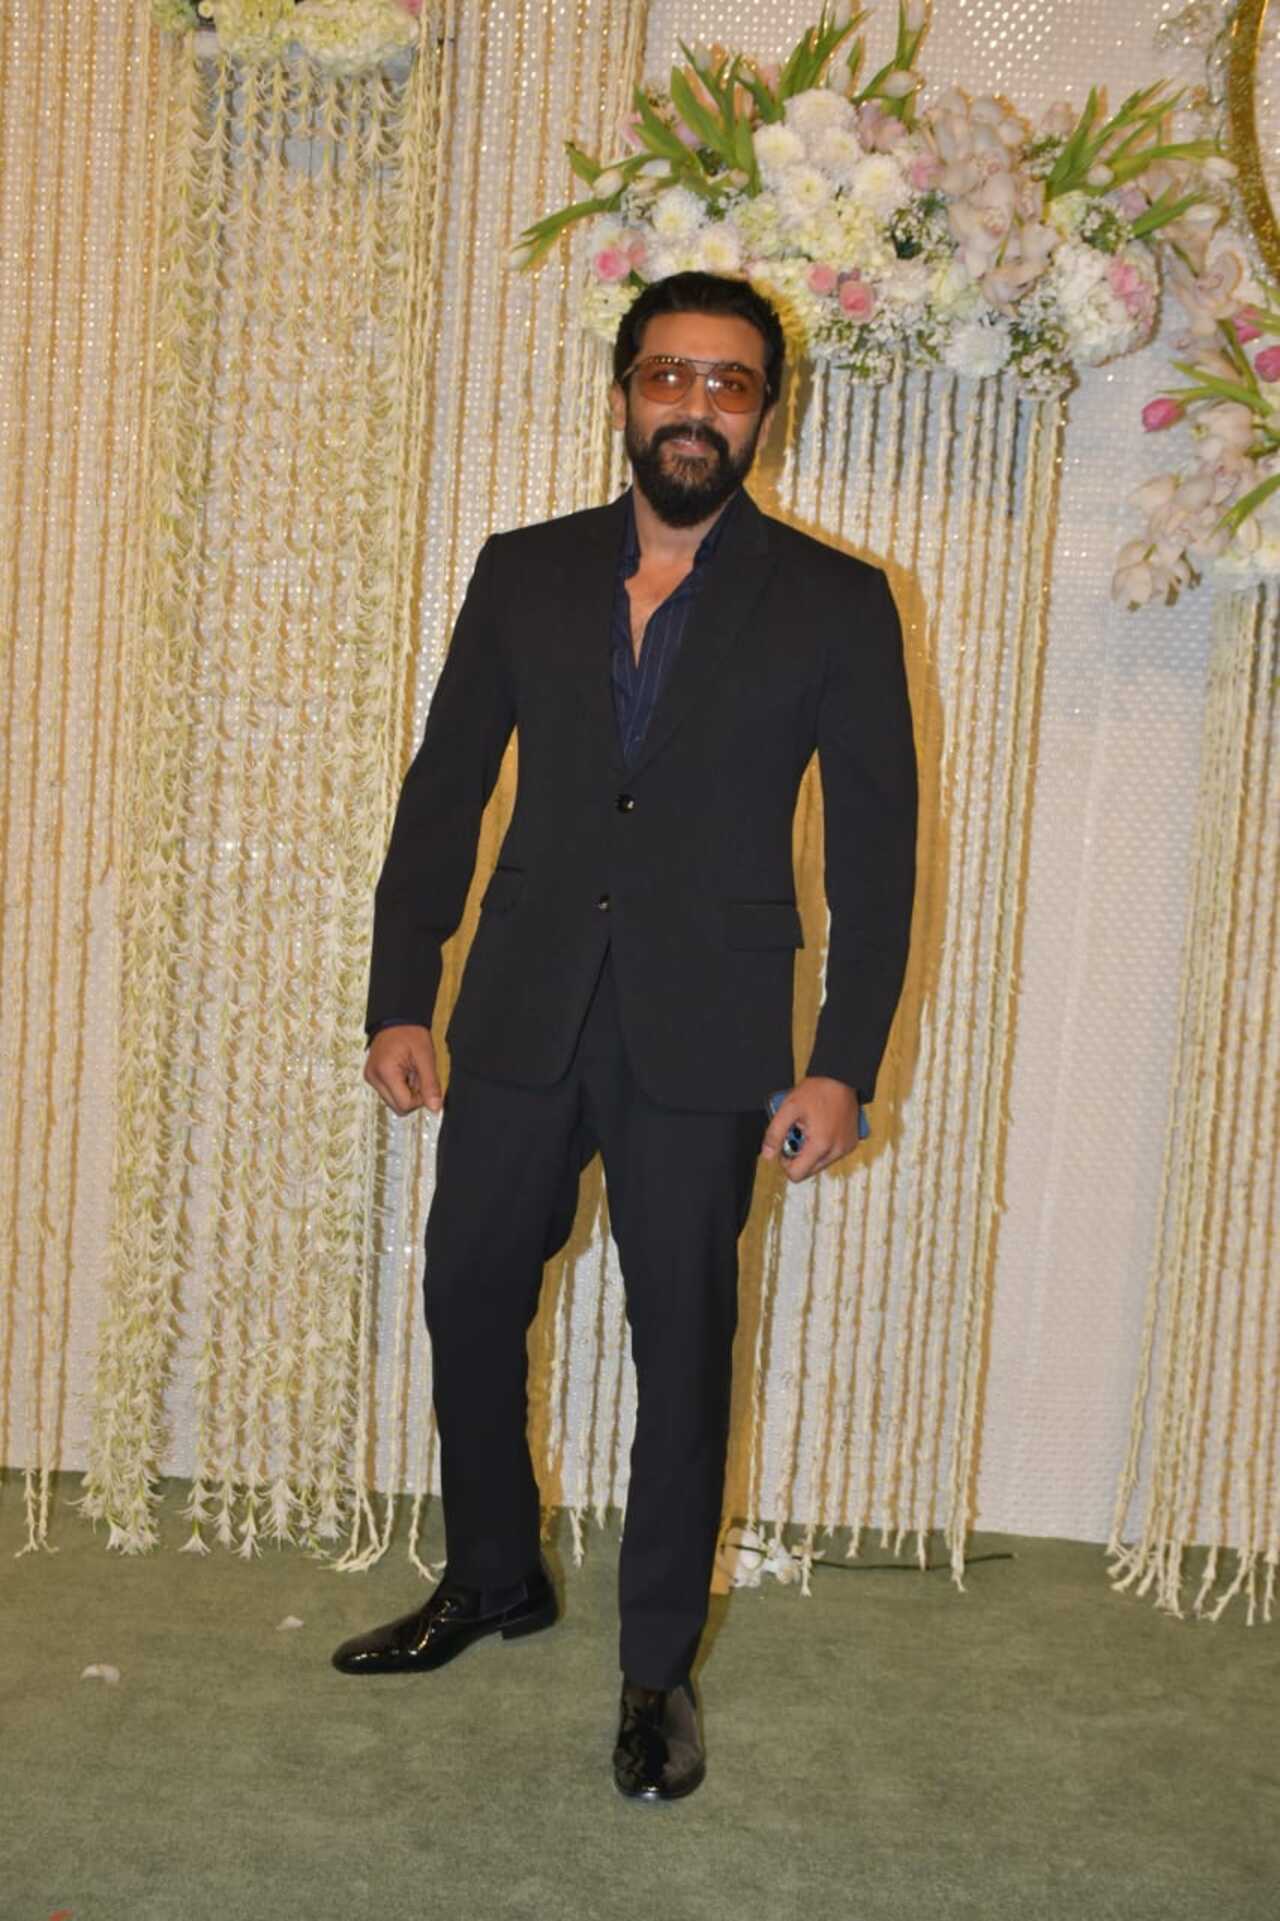 Actor Suriya looked dapper in an all-black suit and brown shades